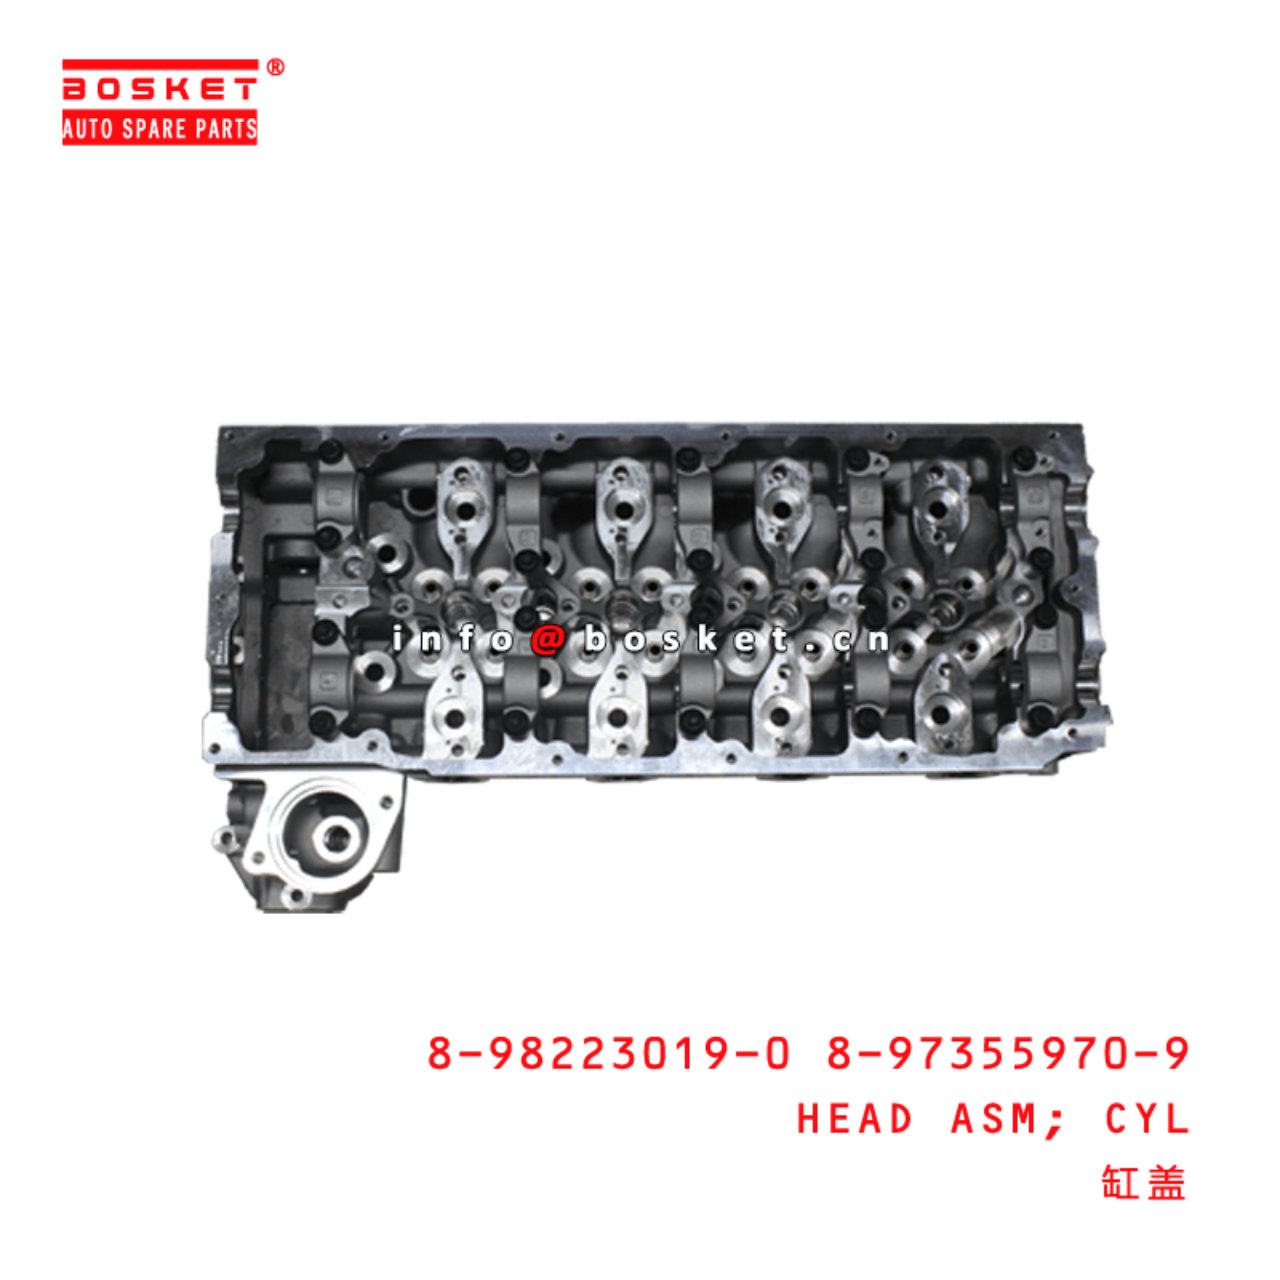 8-98223019-0 8-97355970-9 Cylinder Head Assembly 8982230190 8973559709 Suitable for ISUZU TFR 4JJ1-T